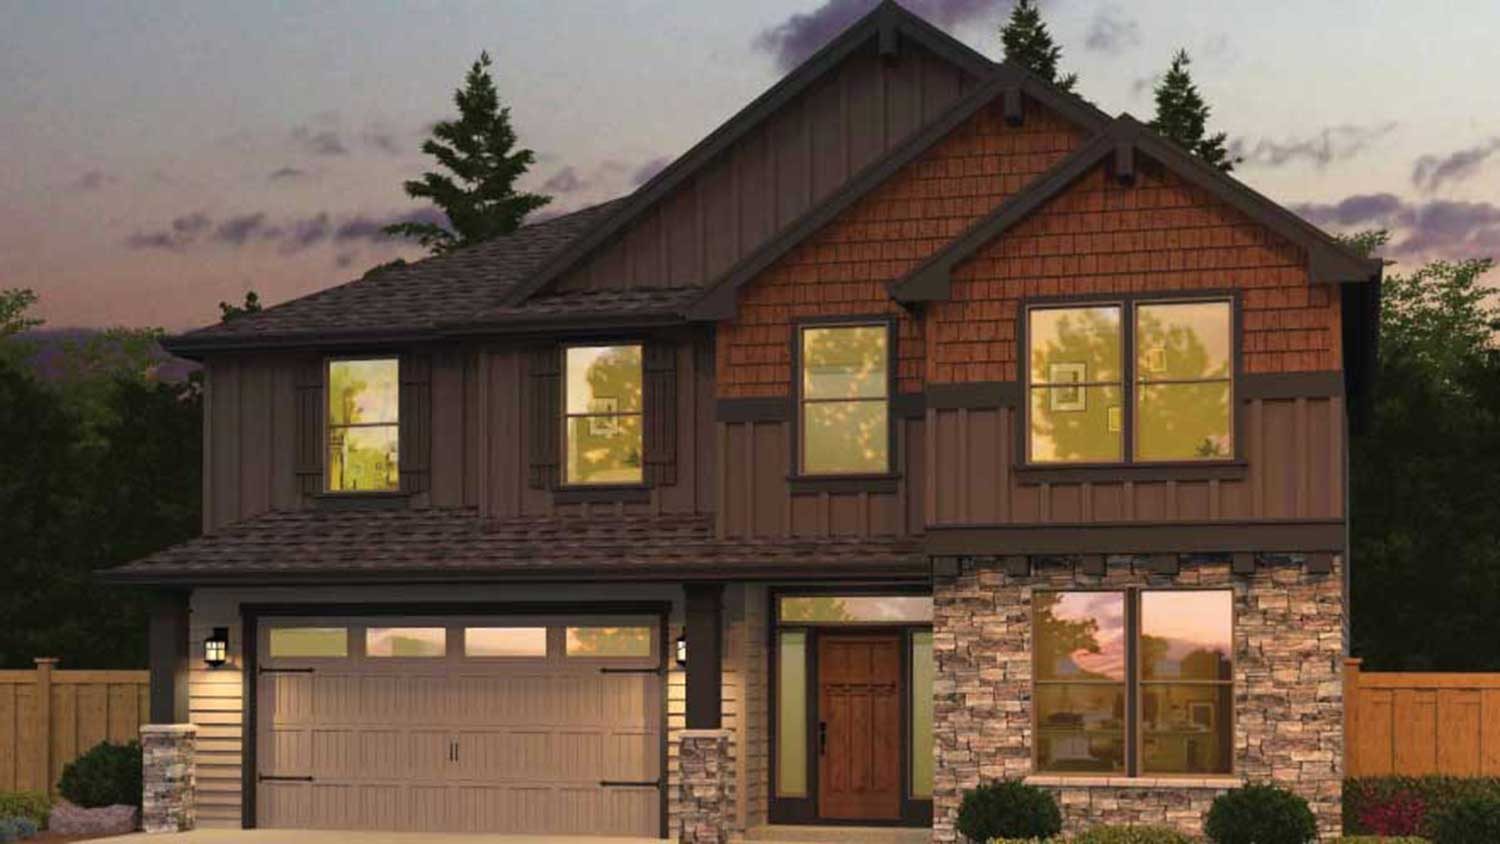 Rendering of the Bandon home by Kingston Homes